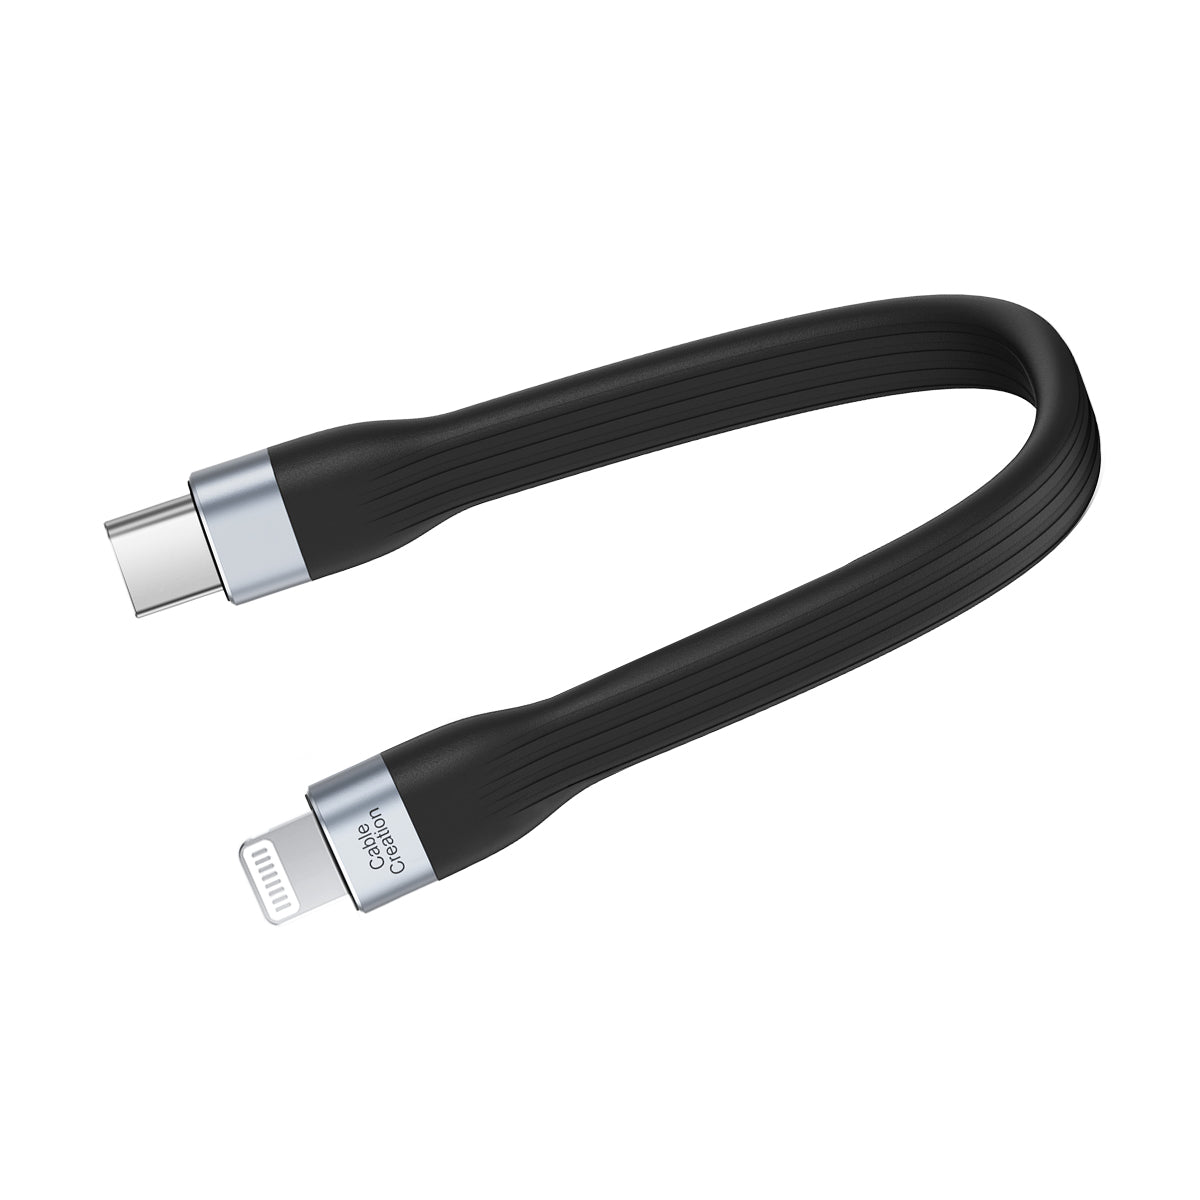 Short Lightning USB C Cable | CableCreation